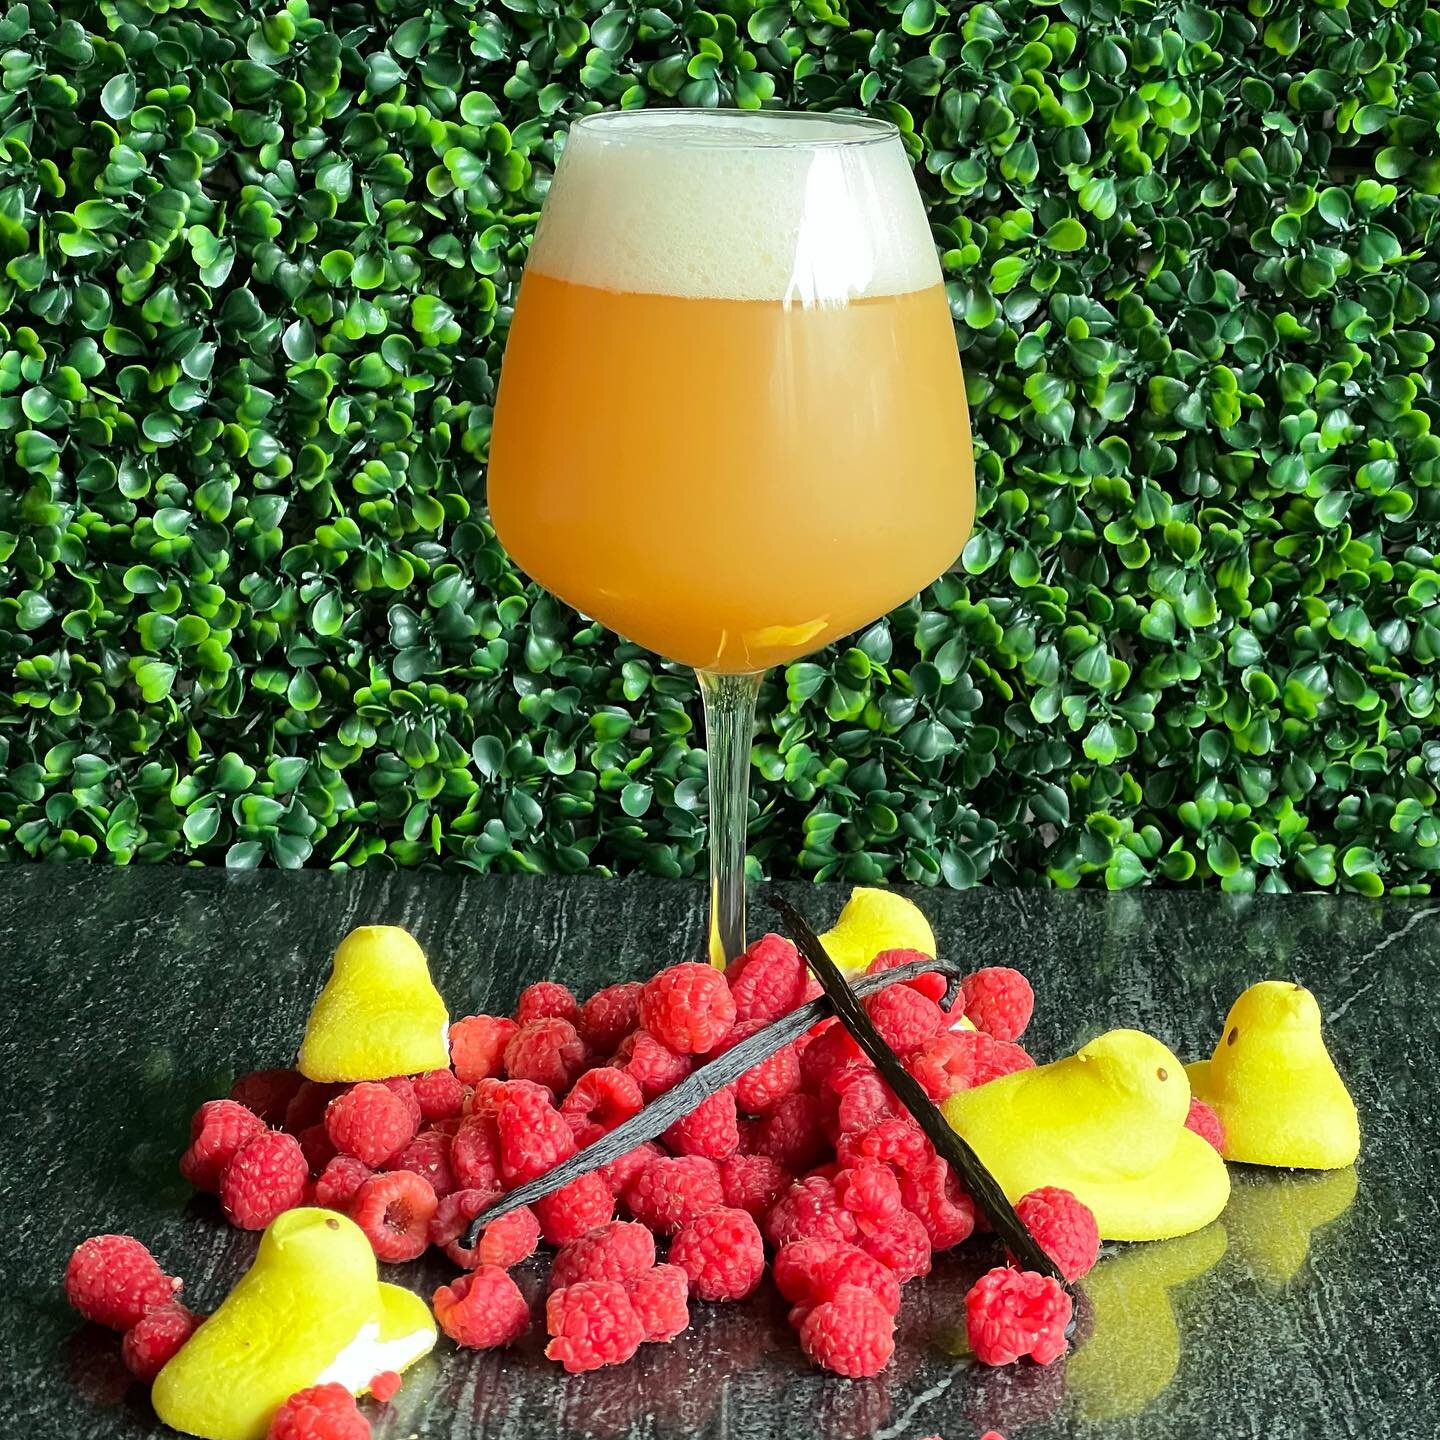 🐥 🍺🐥🍺🐥🍺🐥🍺🐥🍺

He Is Rizzin&rsquo;

This Thursday, we&rsquo;ve got a special lil&rsquo; treat for yinz. To coincide with our weekly vinyl night, we&rsquo;ll have a single keg of our new Early Spring DIPA. Coming in at a soft 8% abv and having